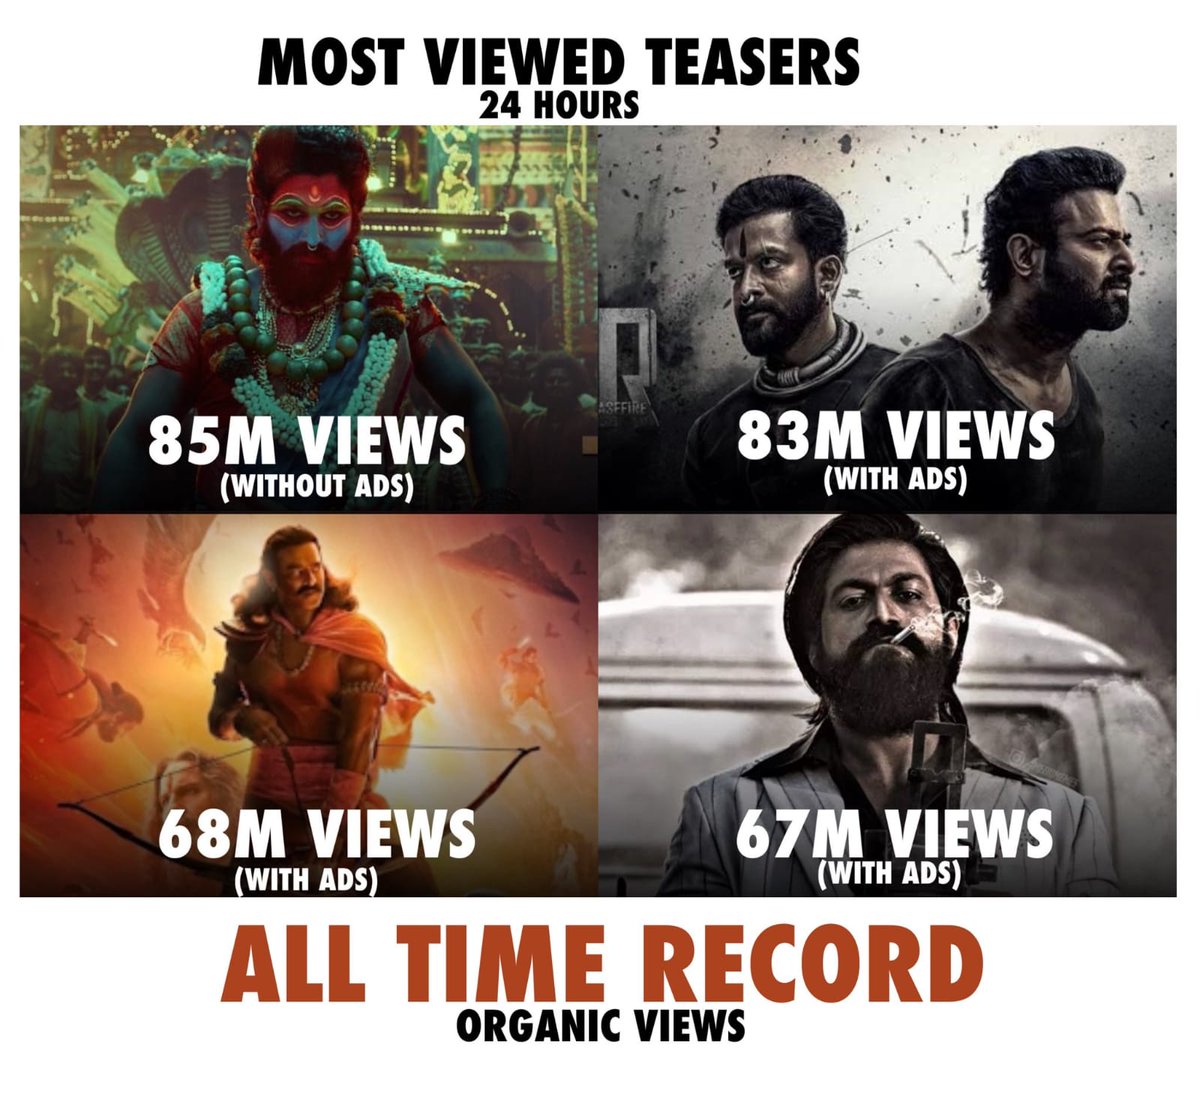 MOST VIEWED INDIAN TEASER 1 Channel 
#Pushpa2TheRuleTeaser 85M+💥
'AA'll TIME RECORD 
#RecordBreakingPushpa2TEASER